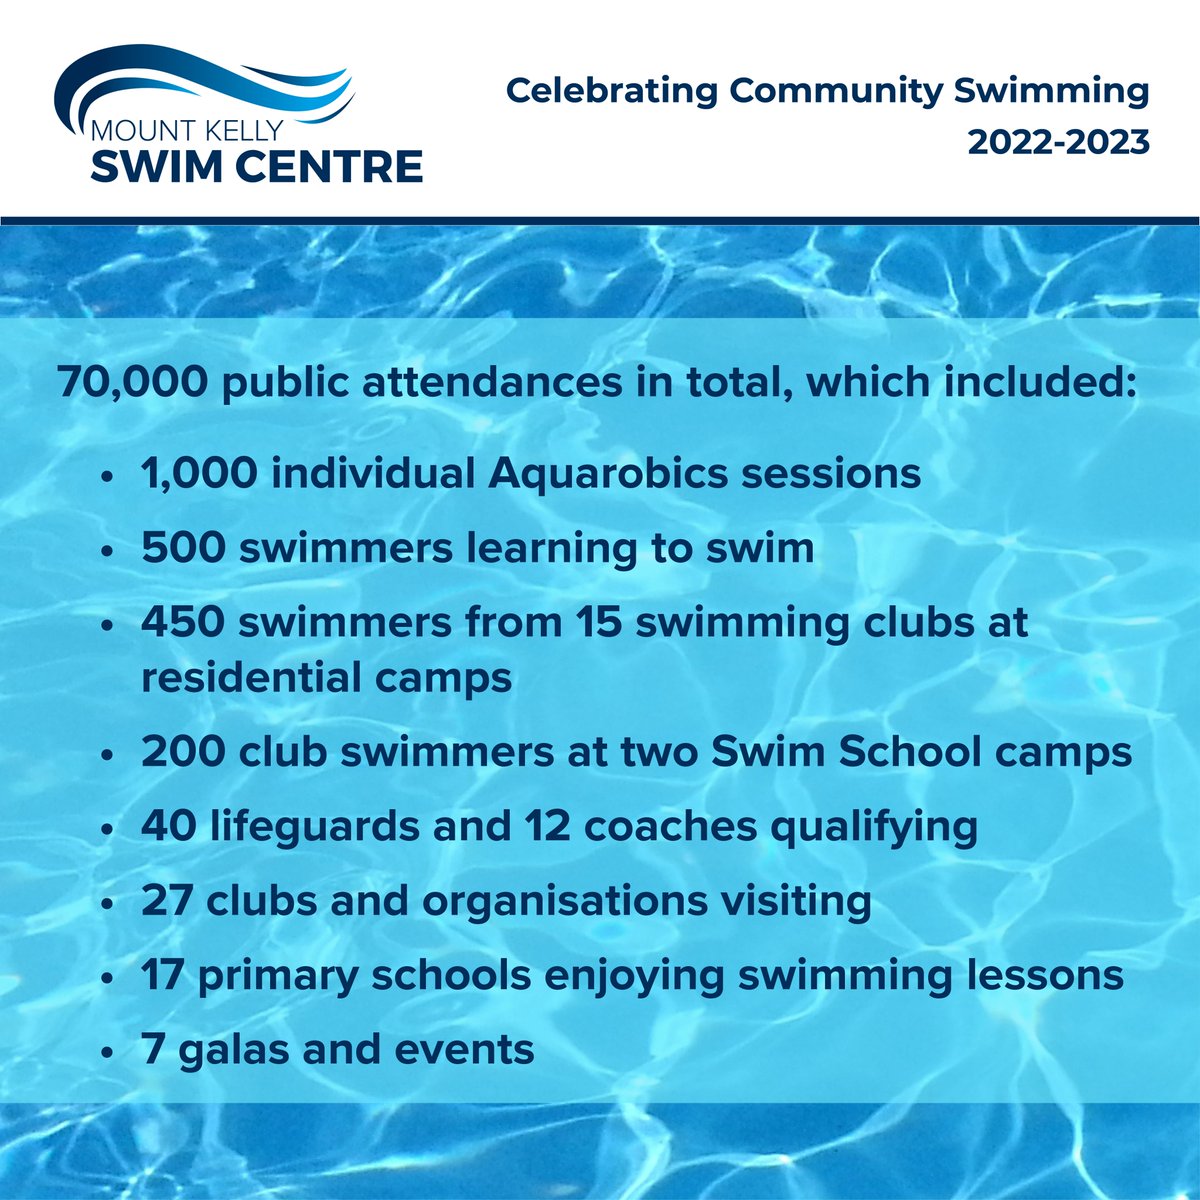 The Mount Kelly Swim Centre has seen over 70,000 attendances in 12-months, not including all our School medal-winning performance swimmers! It's all going swimmingly well. #powerofpartnerships #schoolstogether #partnershipsweek #mountkellyswimcentre #ISC #mountkelly